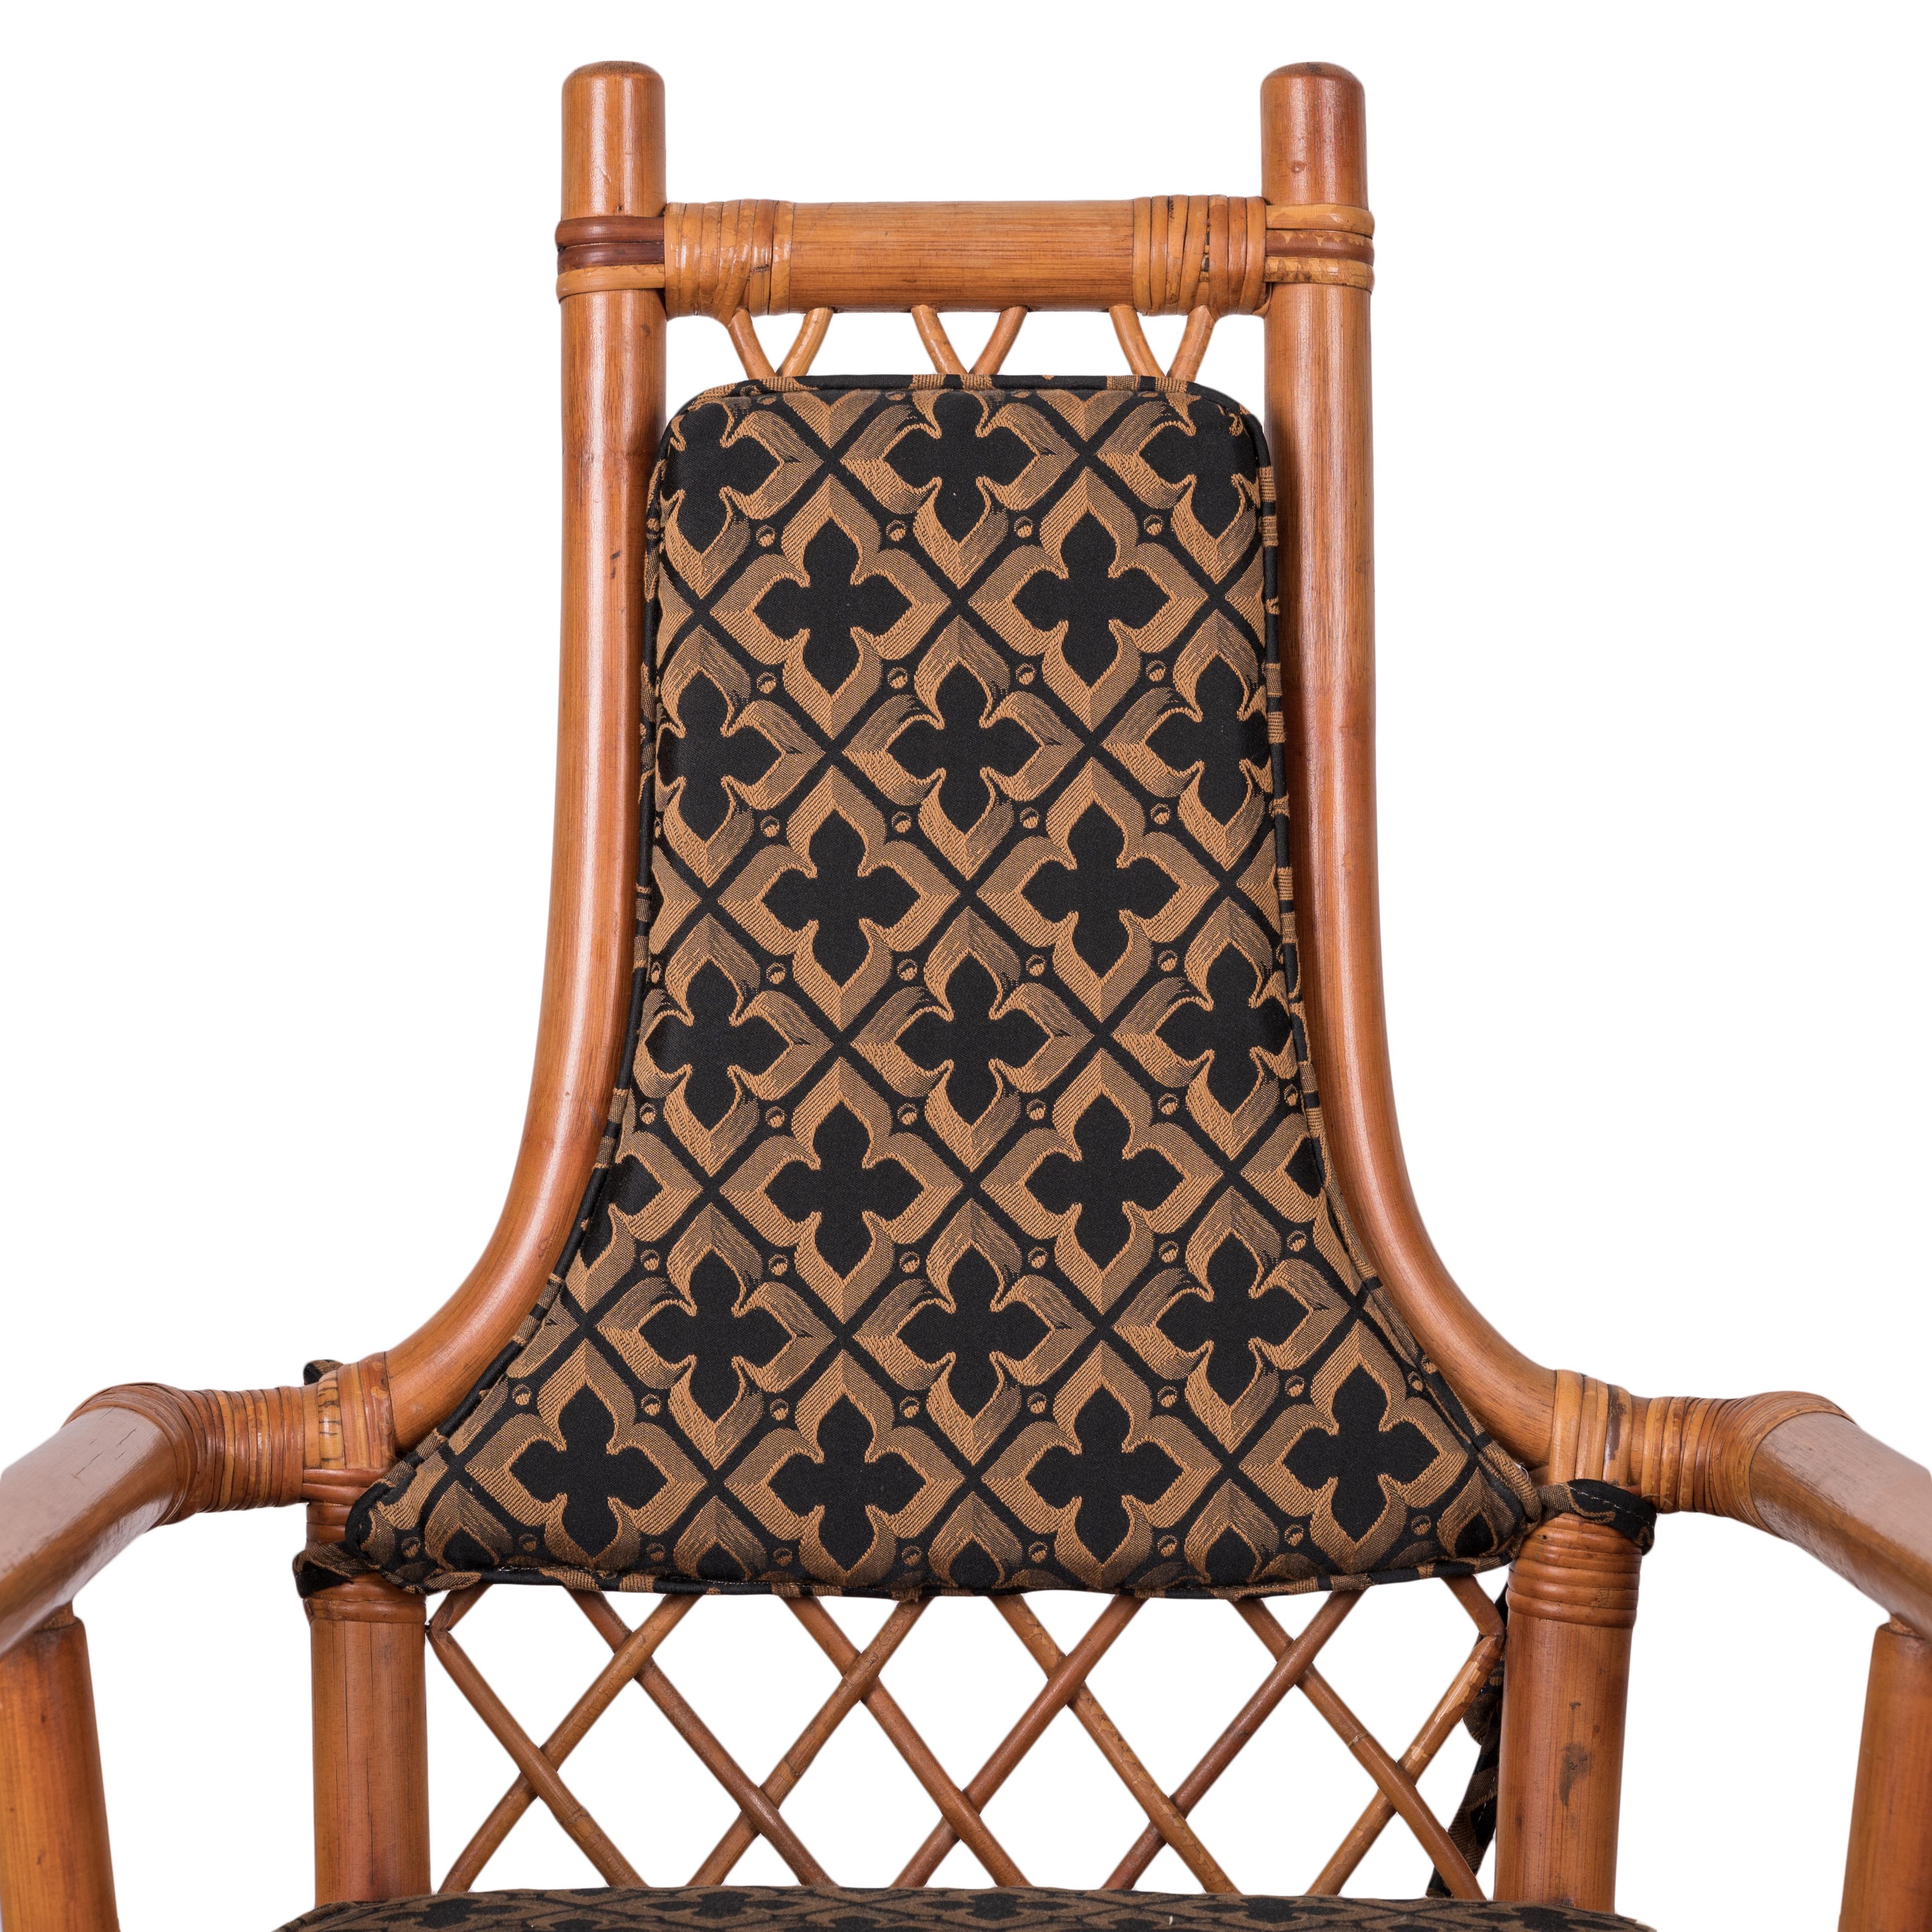 Parzinger for Willow & Reed Dining Chairs, c.1955 - Set of 6 In Good Condition For Sale In Savannah, GA